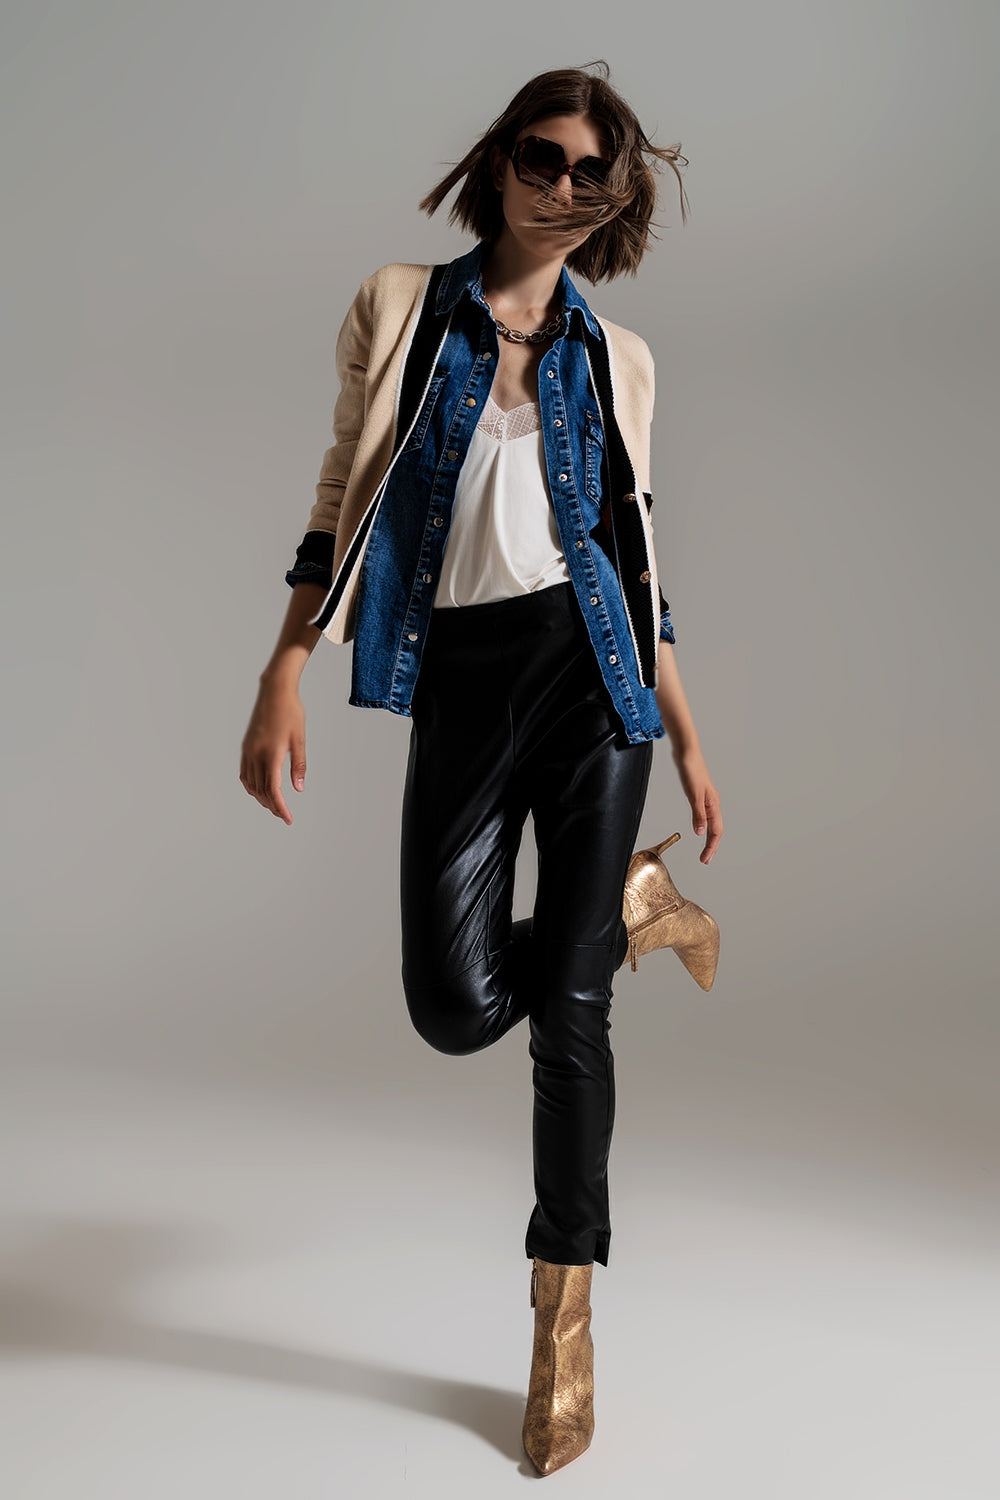 Beige cardigan with pockets and channel style - Szua Store